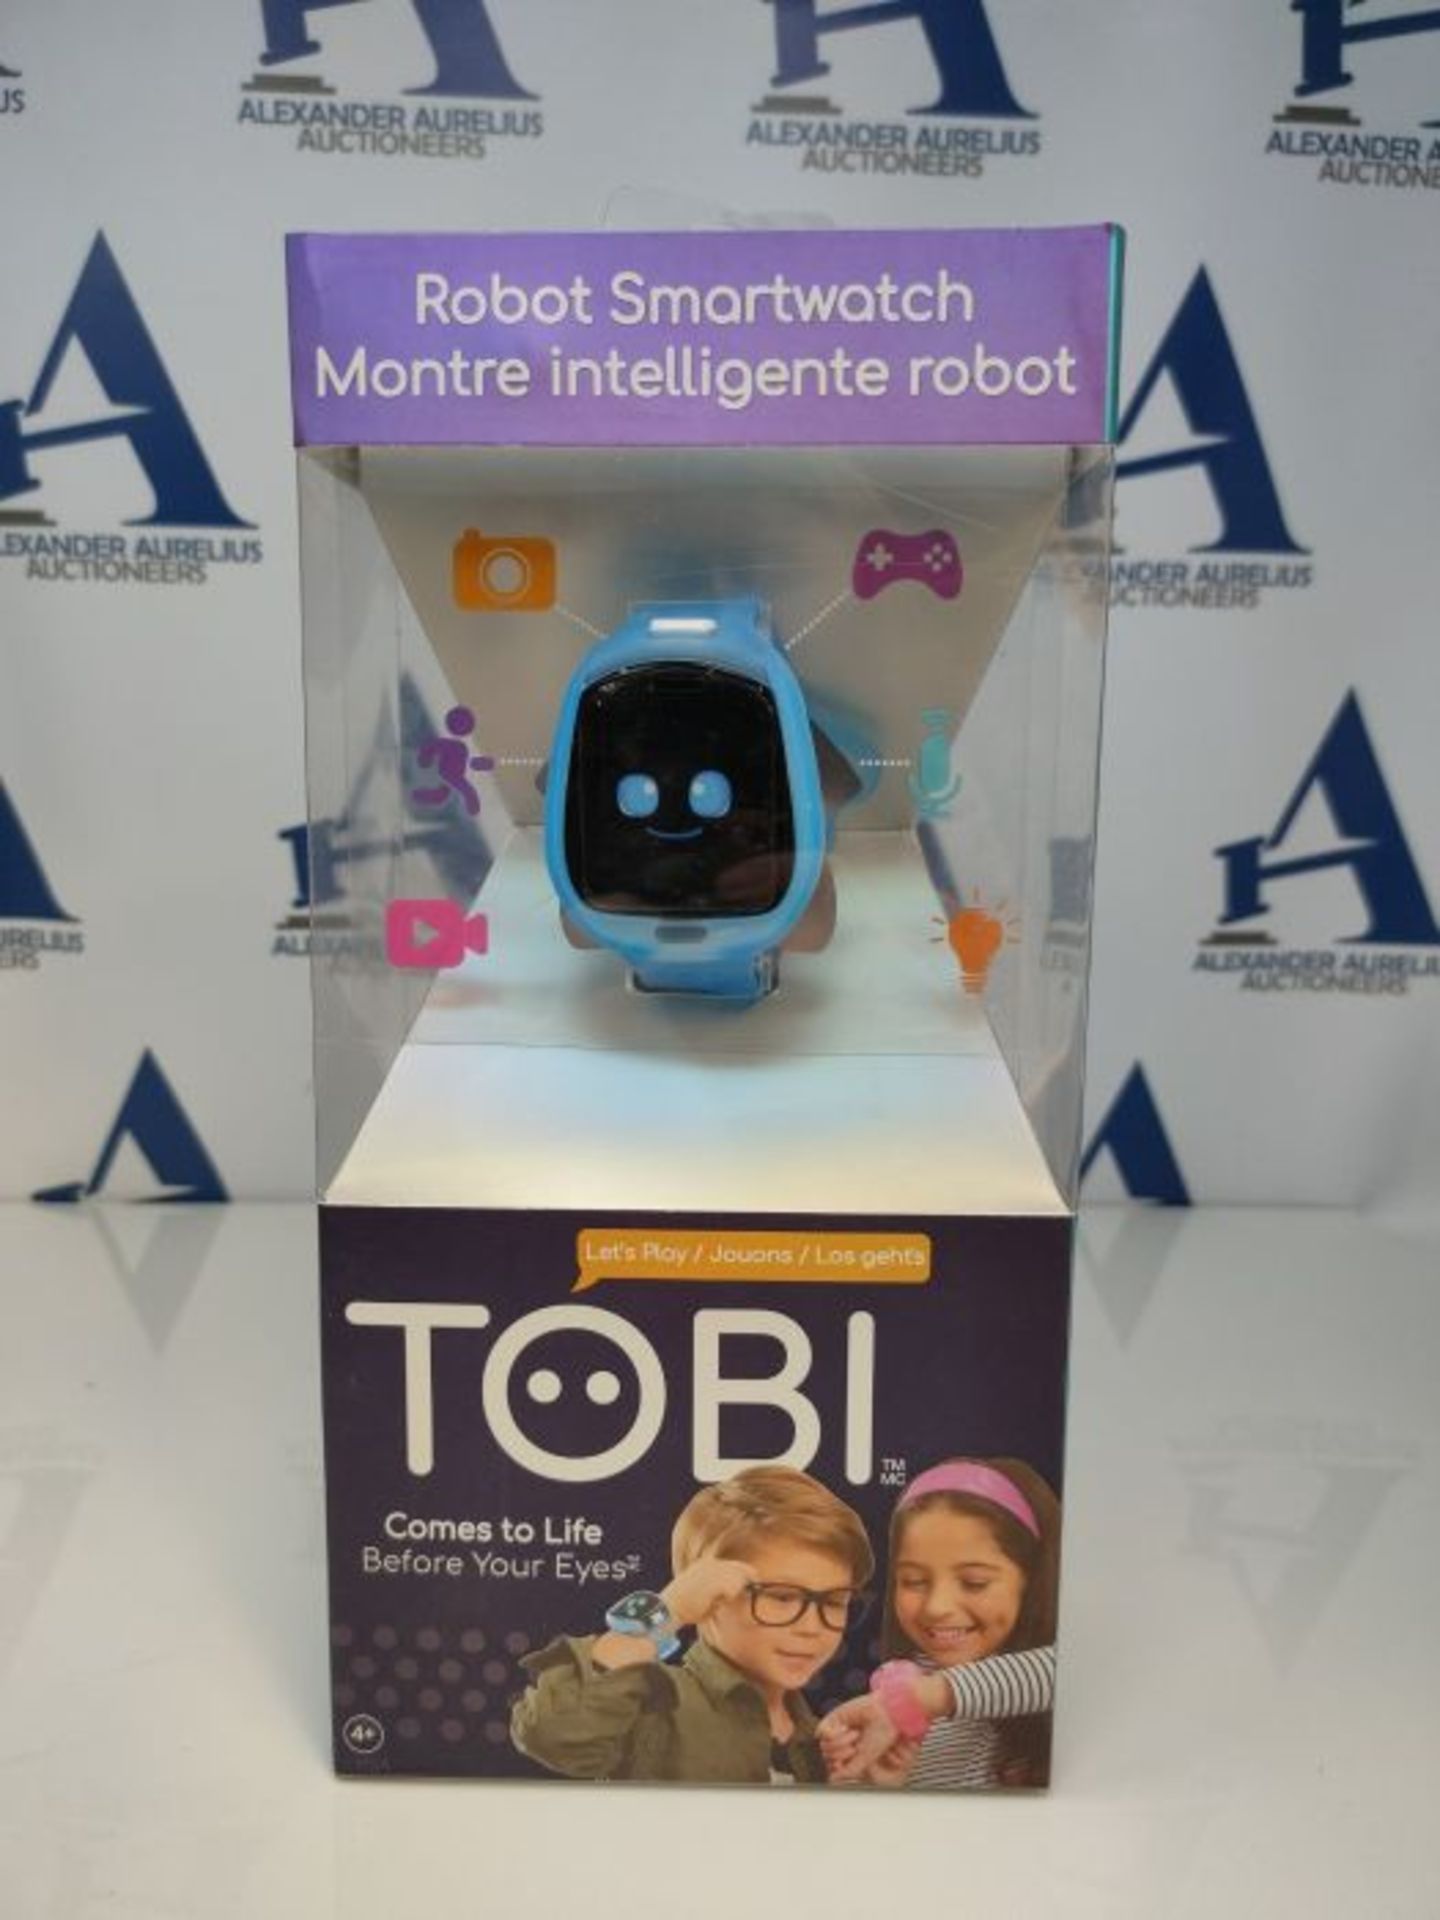 Little Tikes Tobi Robot Smartwatch for Kids with Digital Camera, Video, Games & Activi - Image 2 of 2